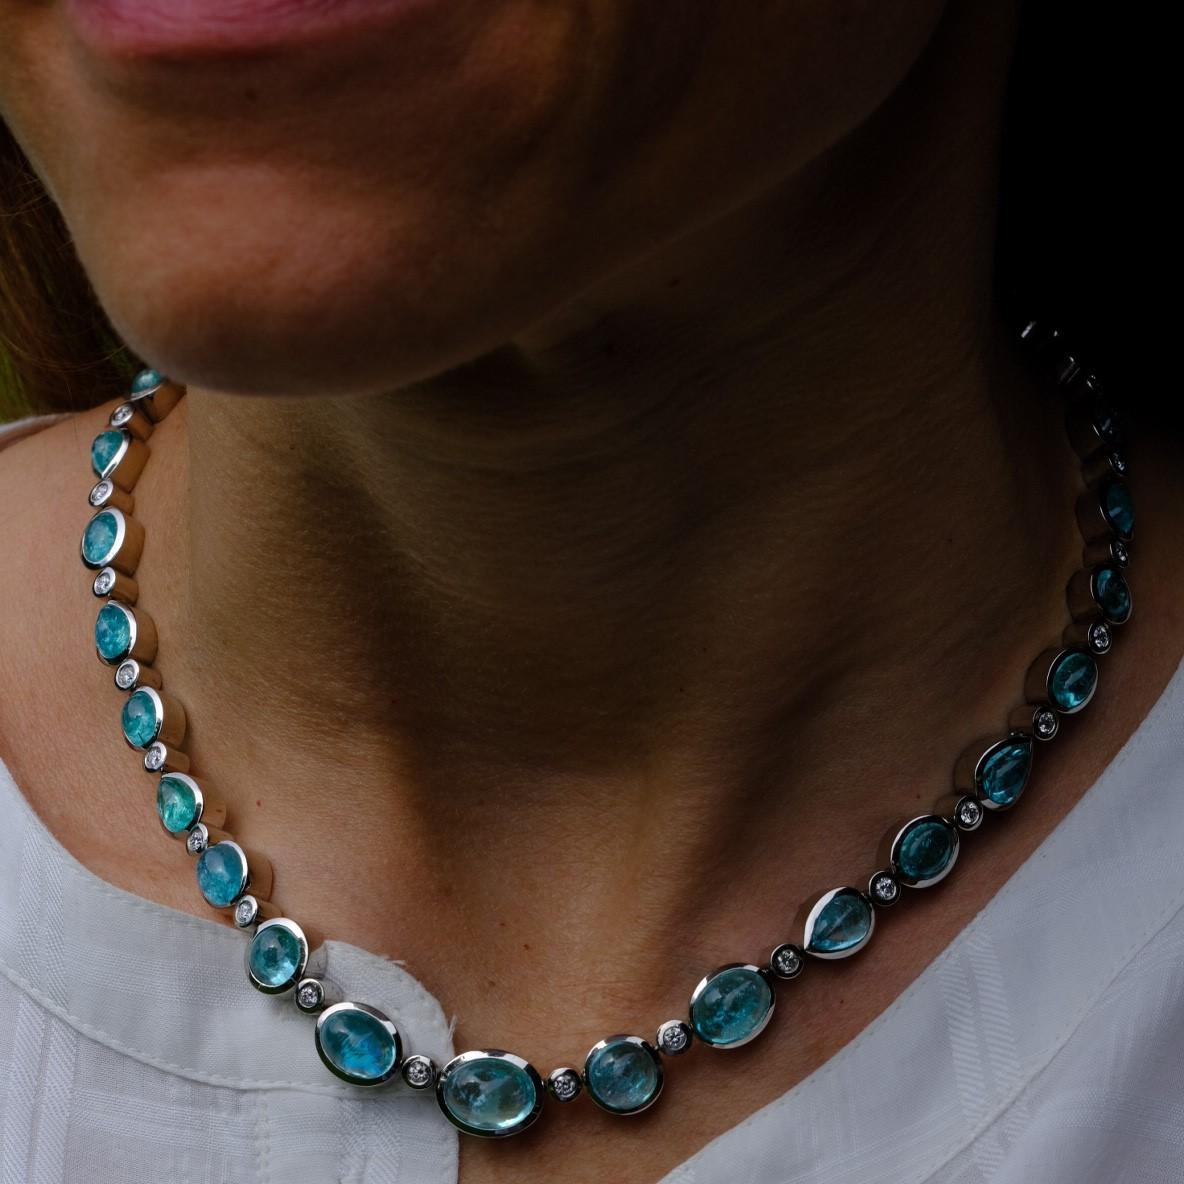 Women's Necklace in Platinum with 29 Paraiba Tourmaline Cabouchons and 46 Diamonds